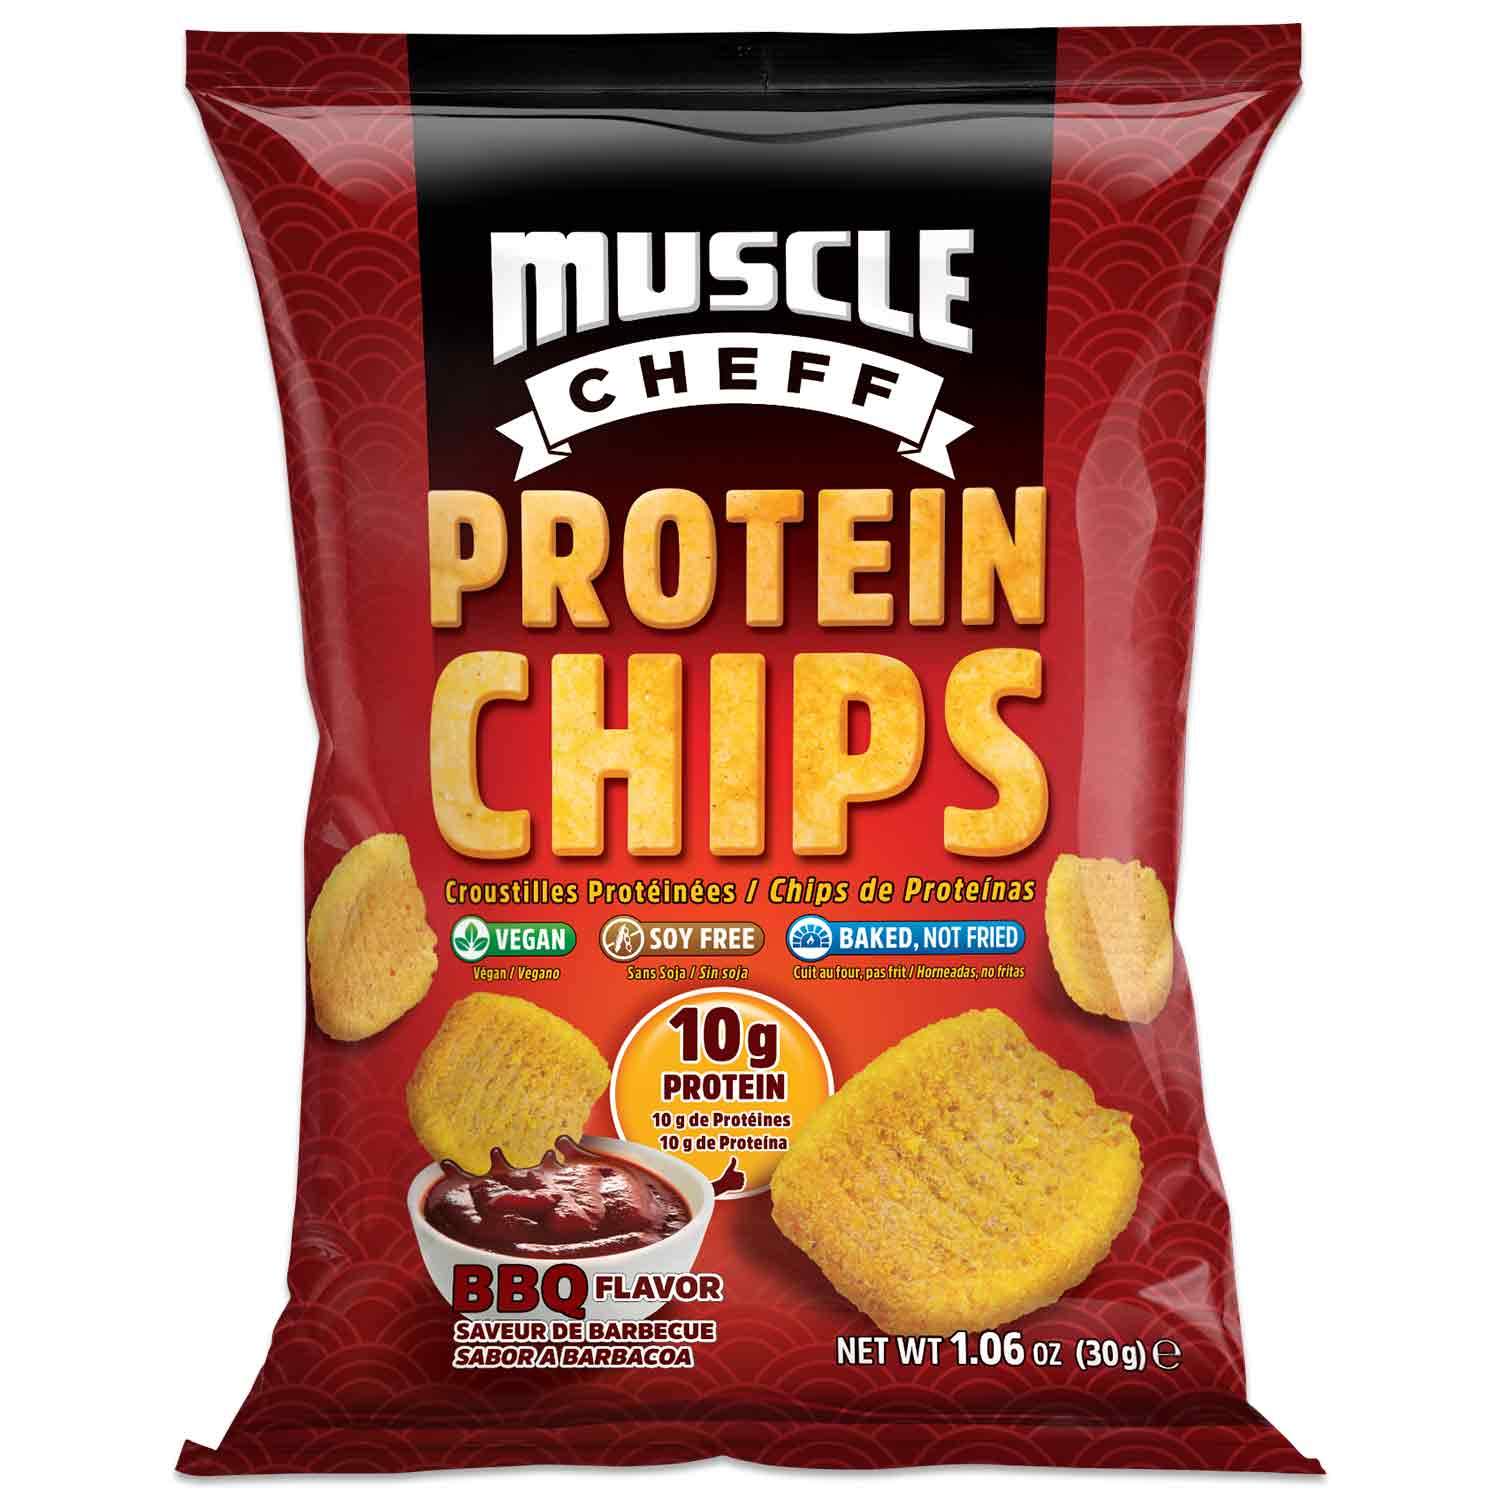 Protein Chips, Soy Free, Muscle Cheff, Fully Baked Pea Protein Chips, High Protein and Fiber, Low Carb, Keto (BBQ )